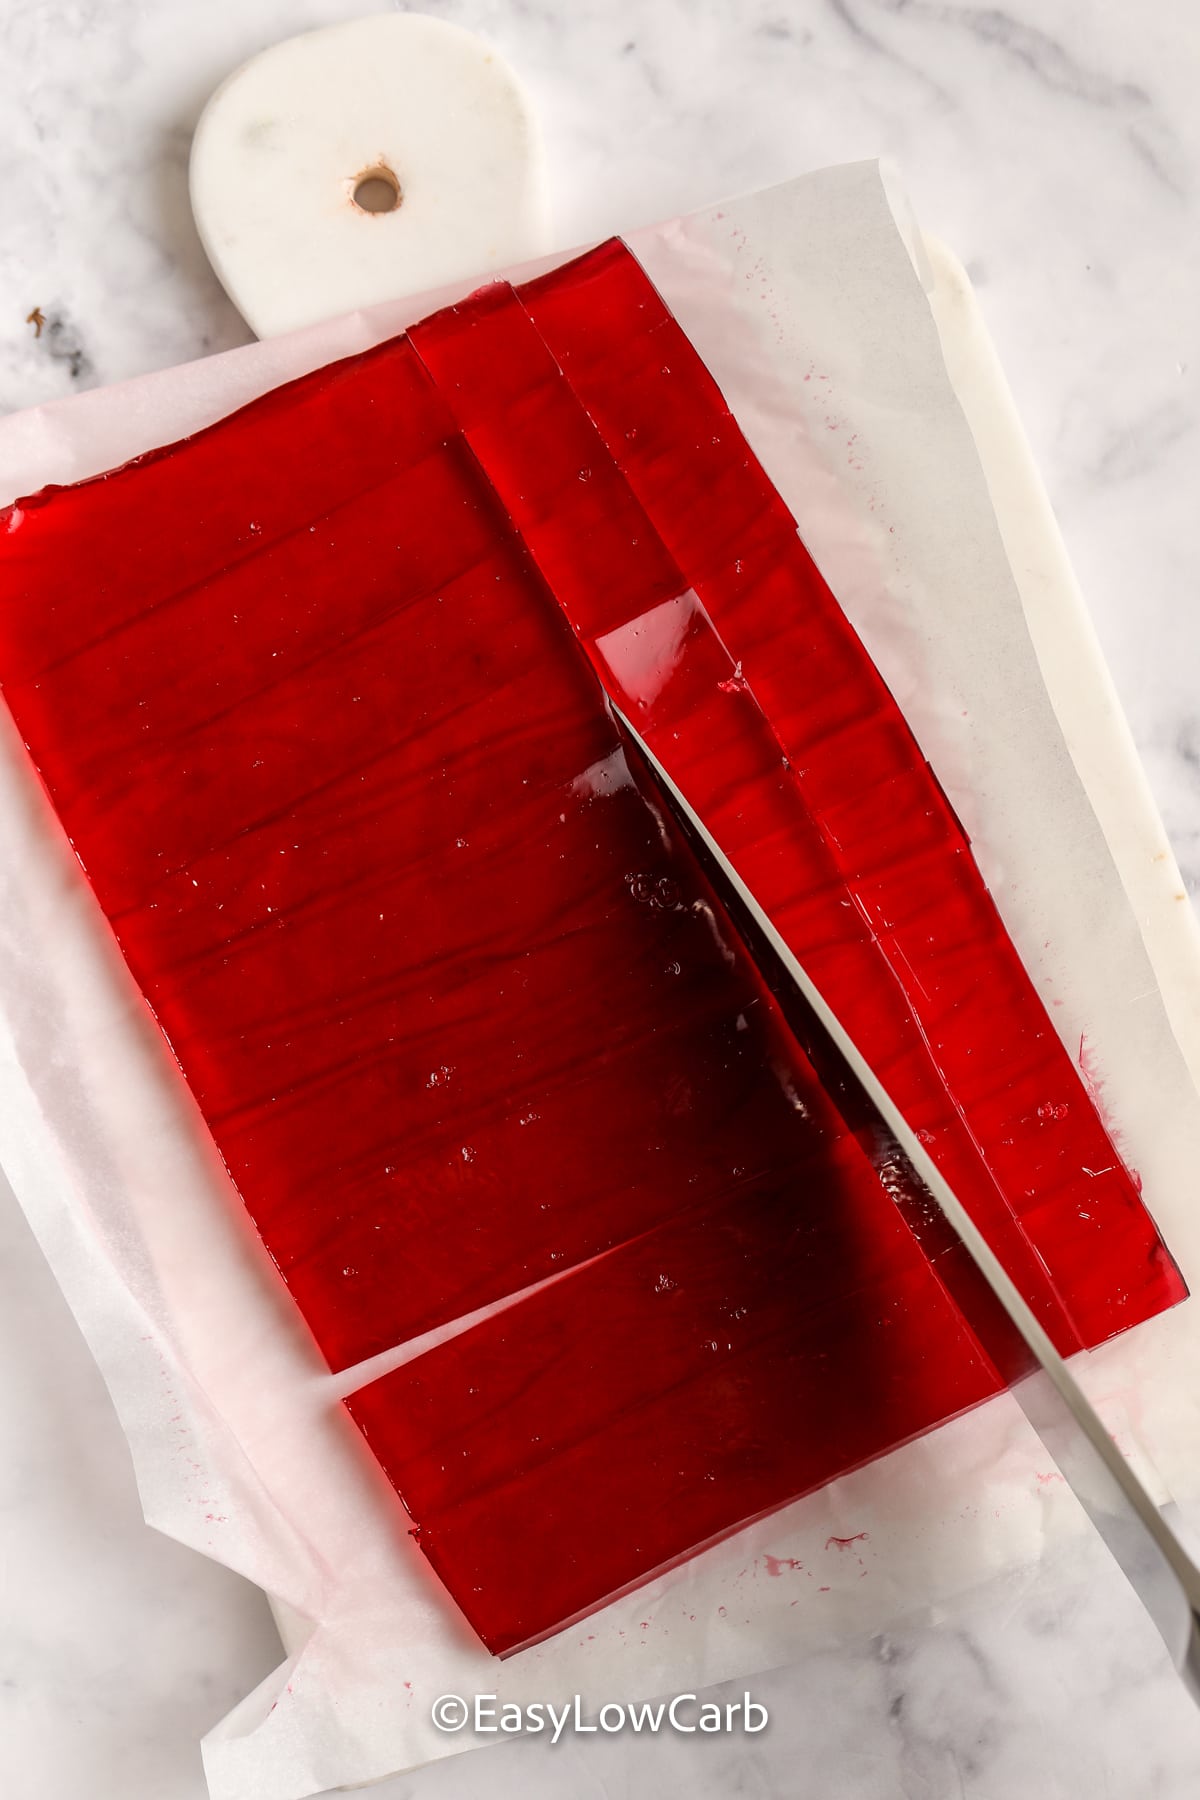 Keto Gummies being cut into a square